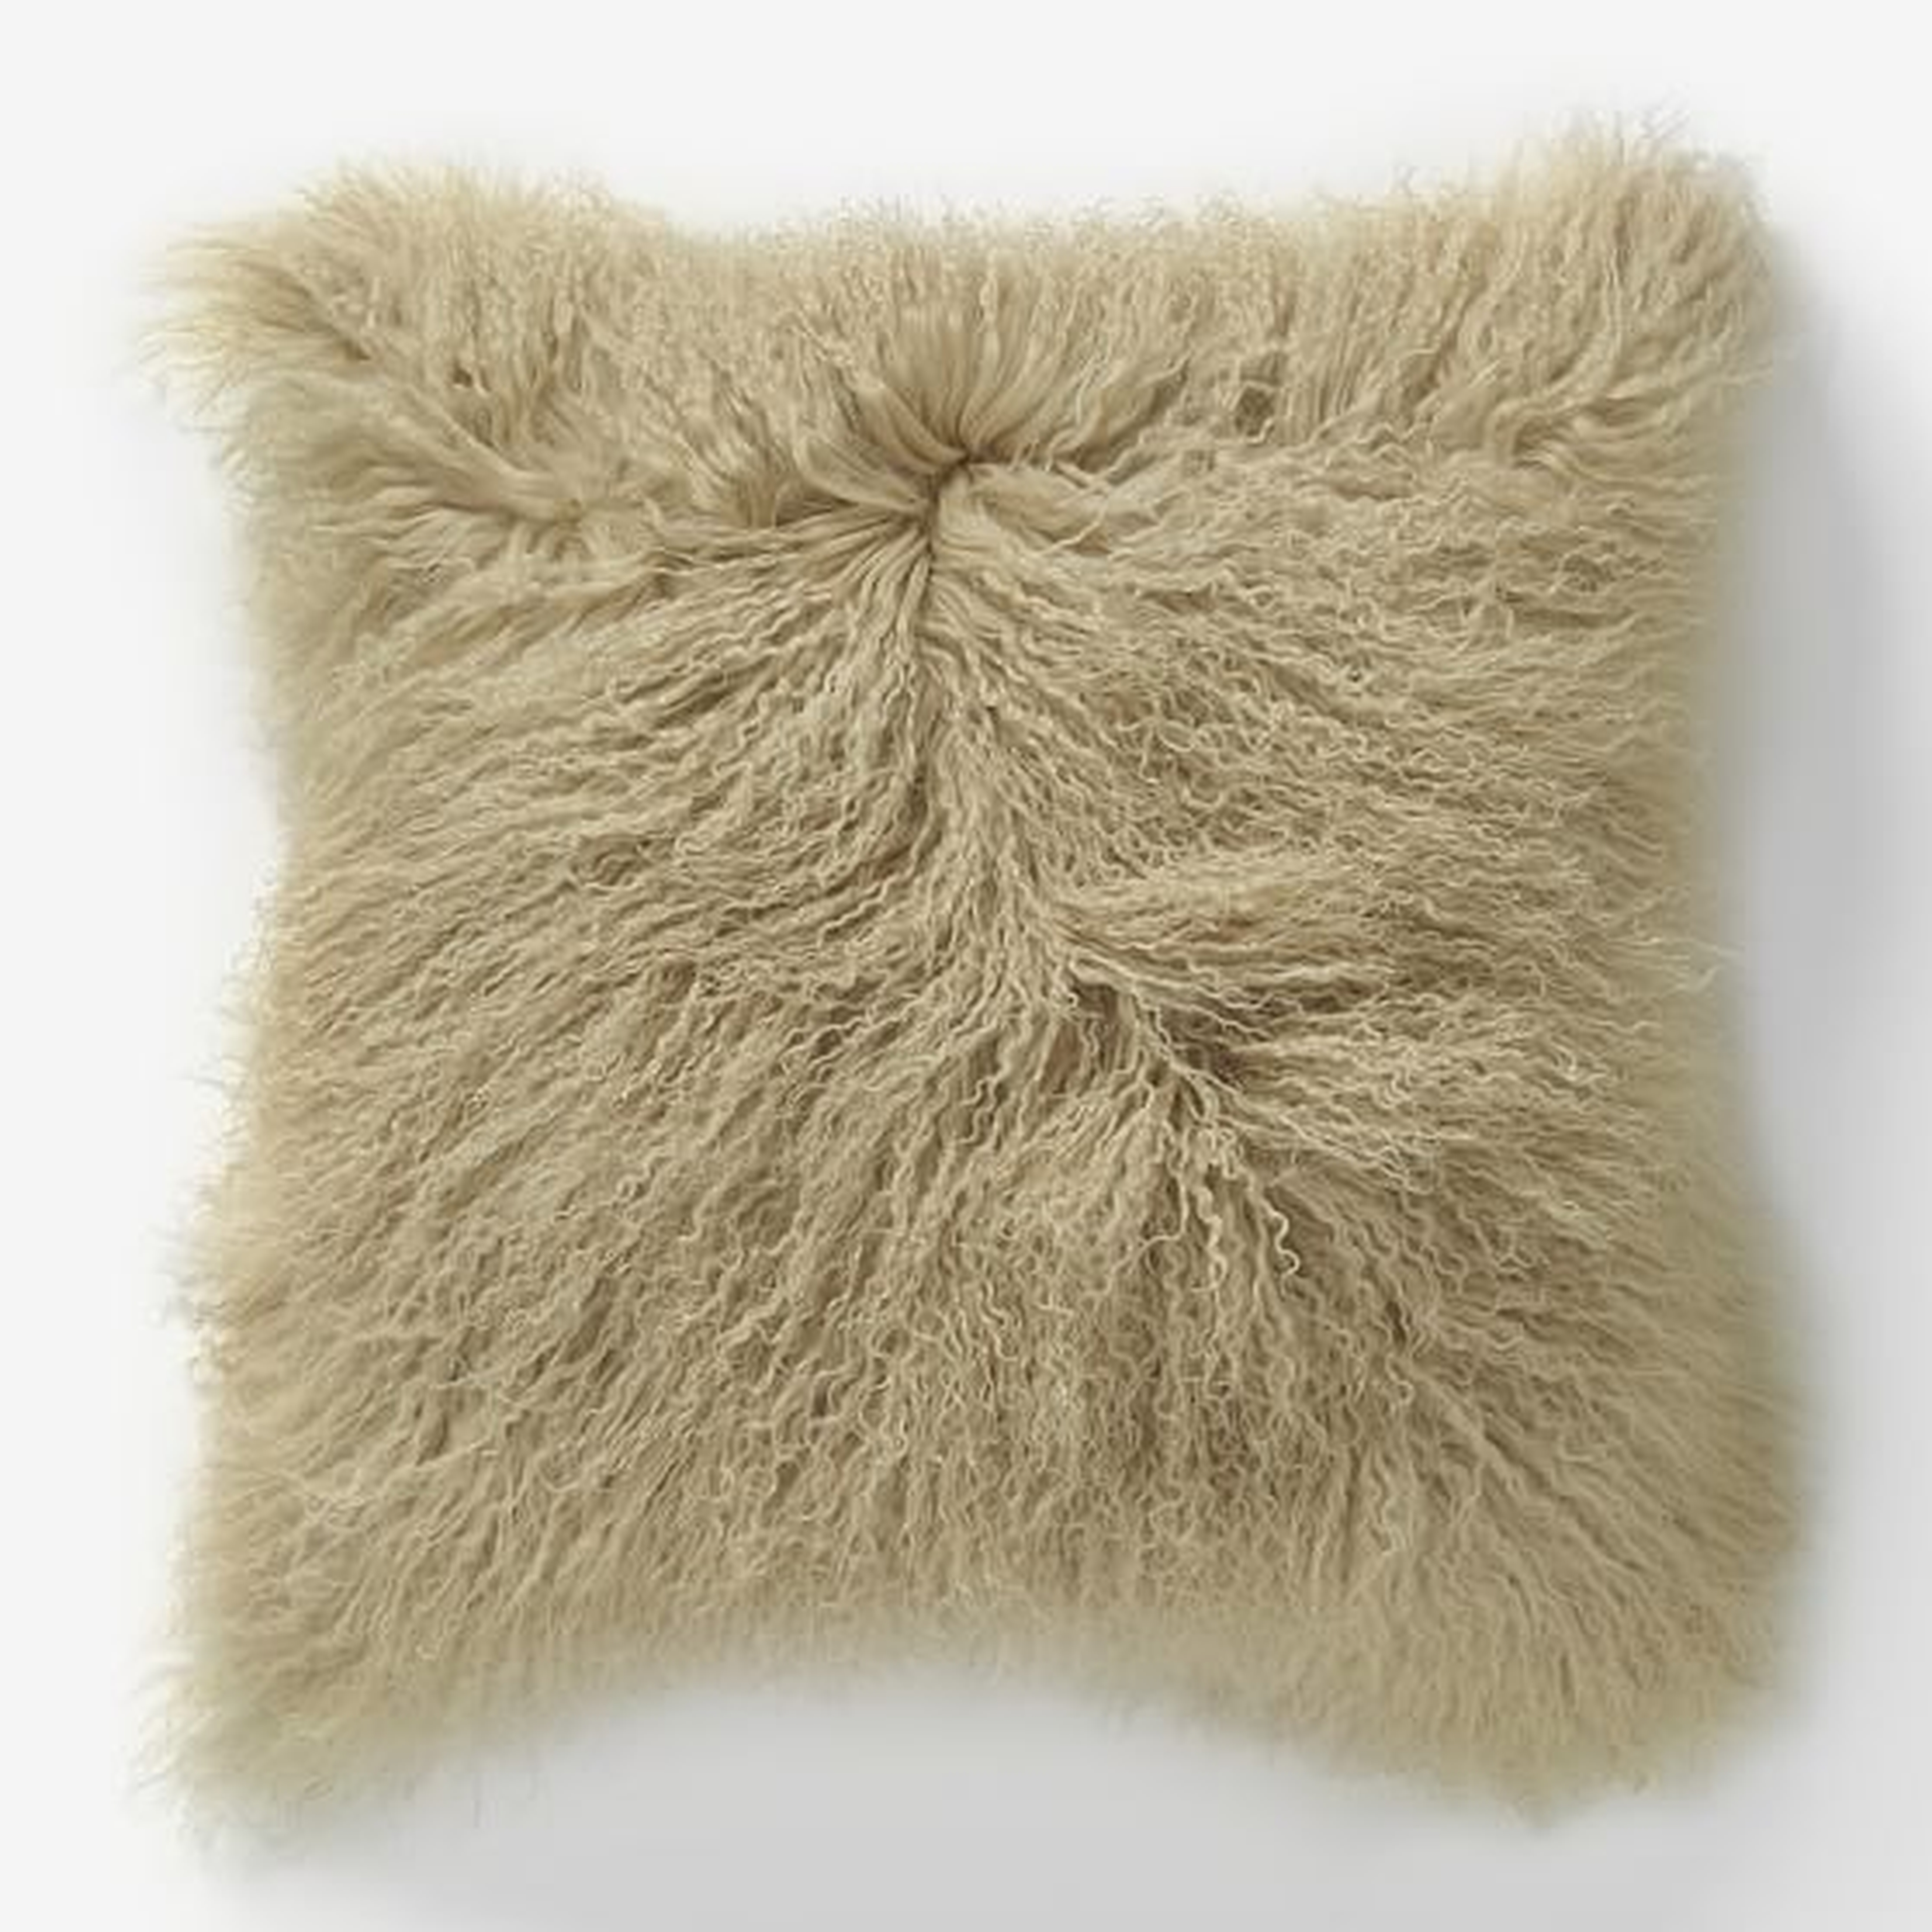 Mongolian Lamb Pillow Cover with Down Alternative Insert, Pebble, 16"x16" - West Elm